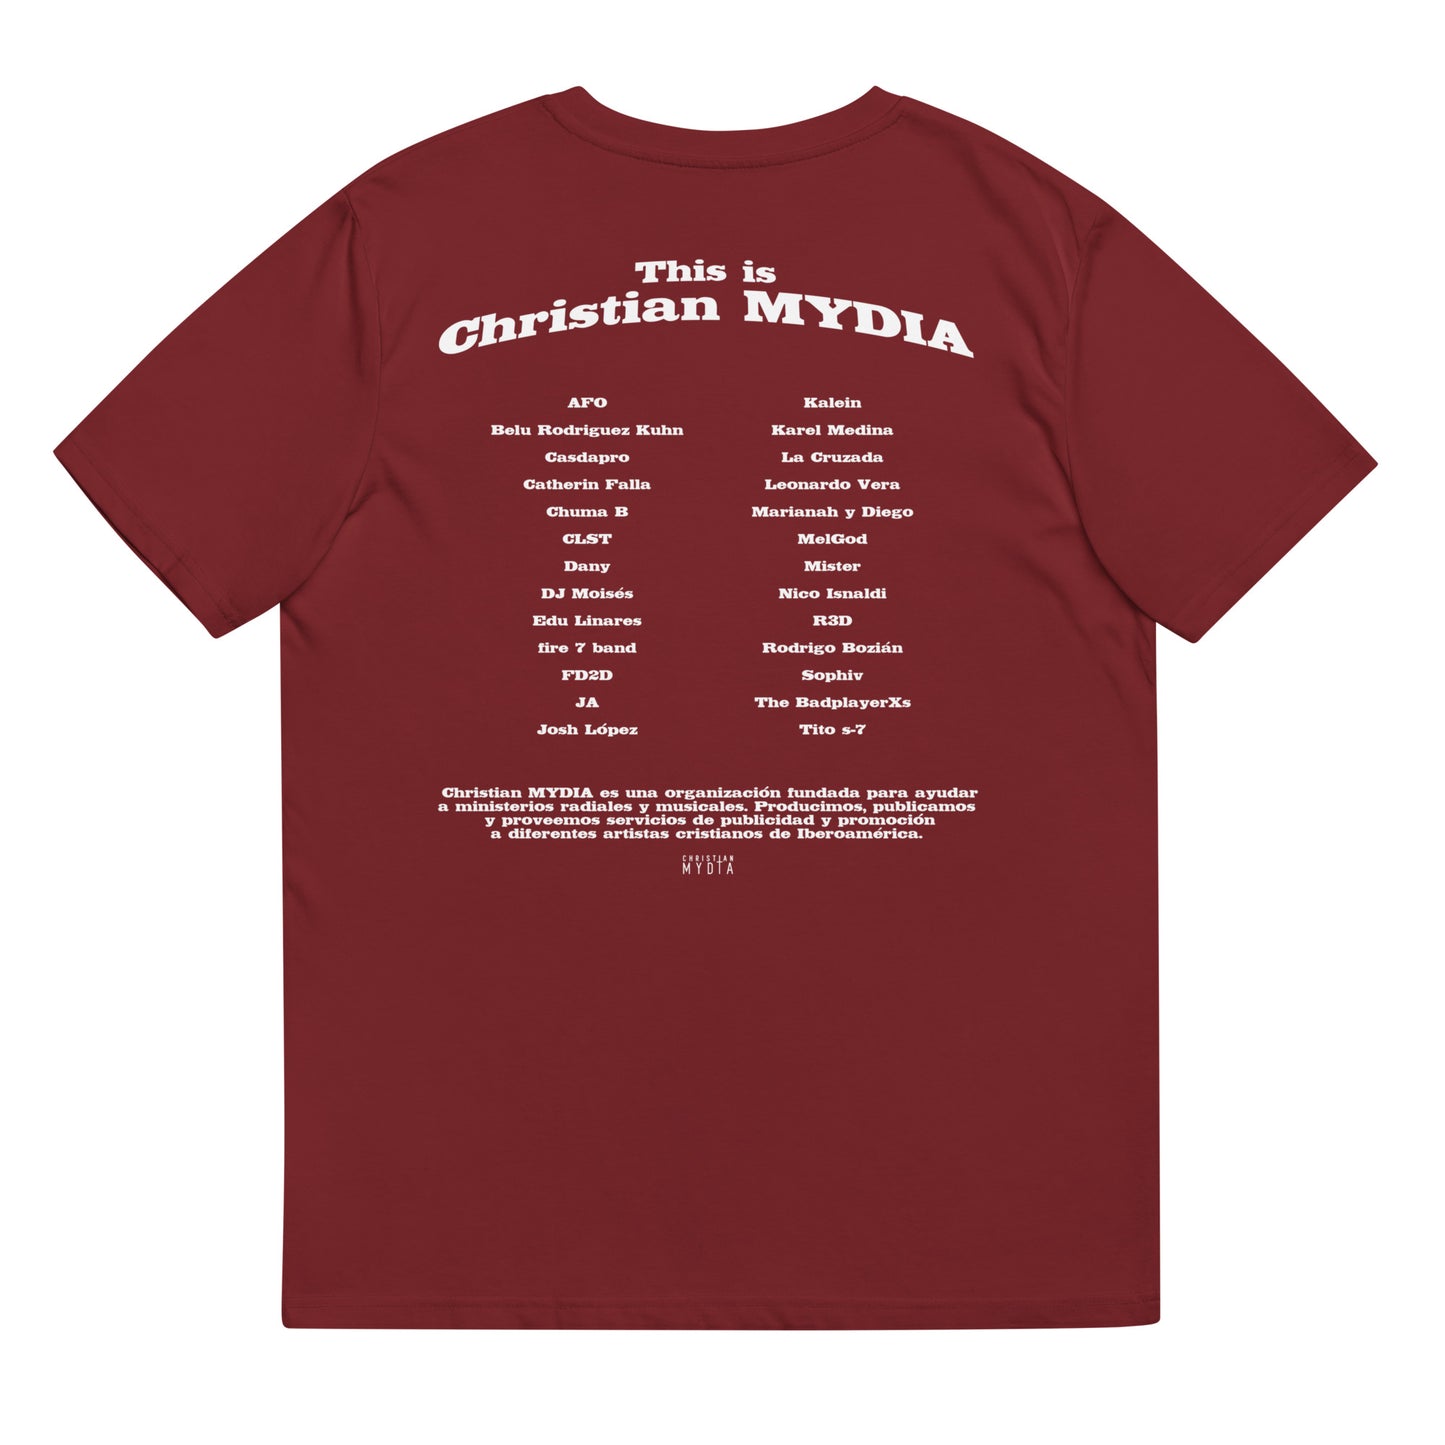 THIS IS CHRISTIAN MYDIA - T-shirt